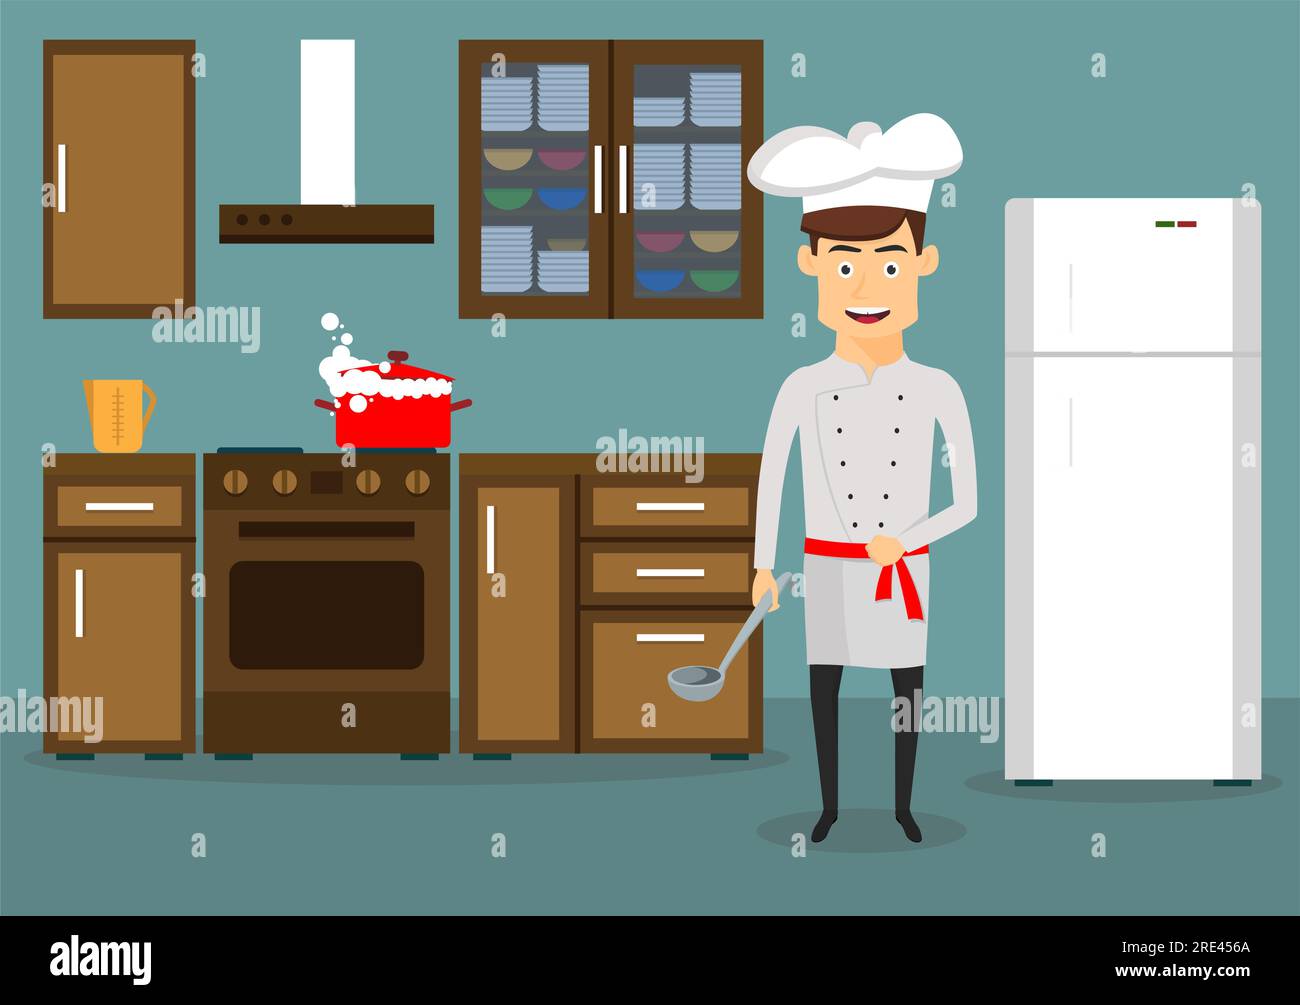 https://c8.alamy.com/comp/2RE456A/smiling-young-man-in-chef-hat-and-tunic-cooking-in-kitchen-at-home-cartoon-flat-style-2RE456A.jpg